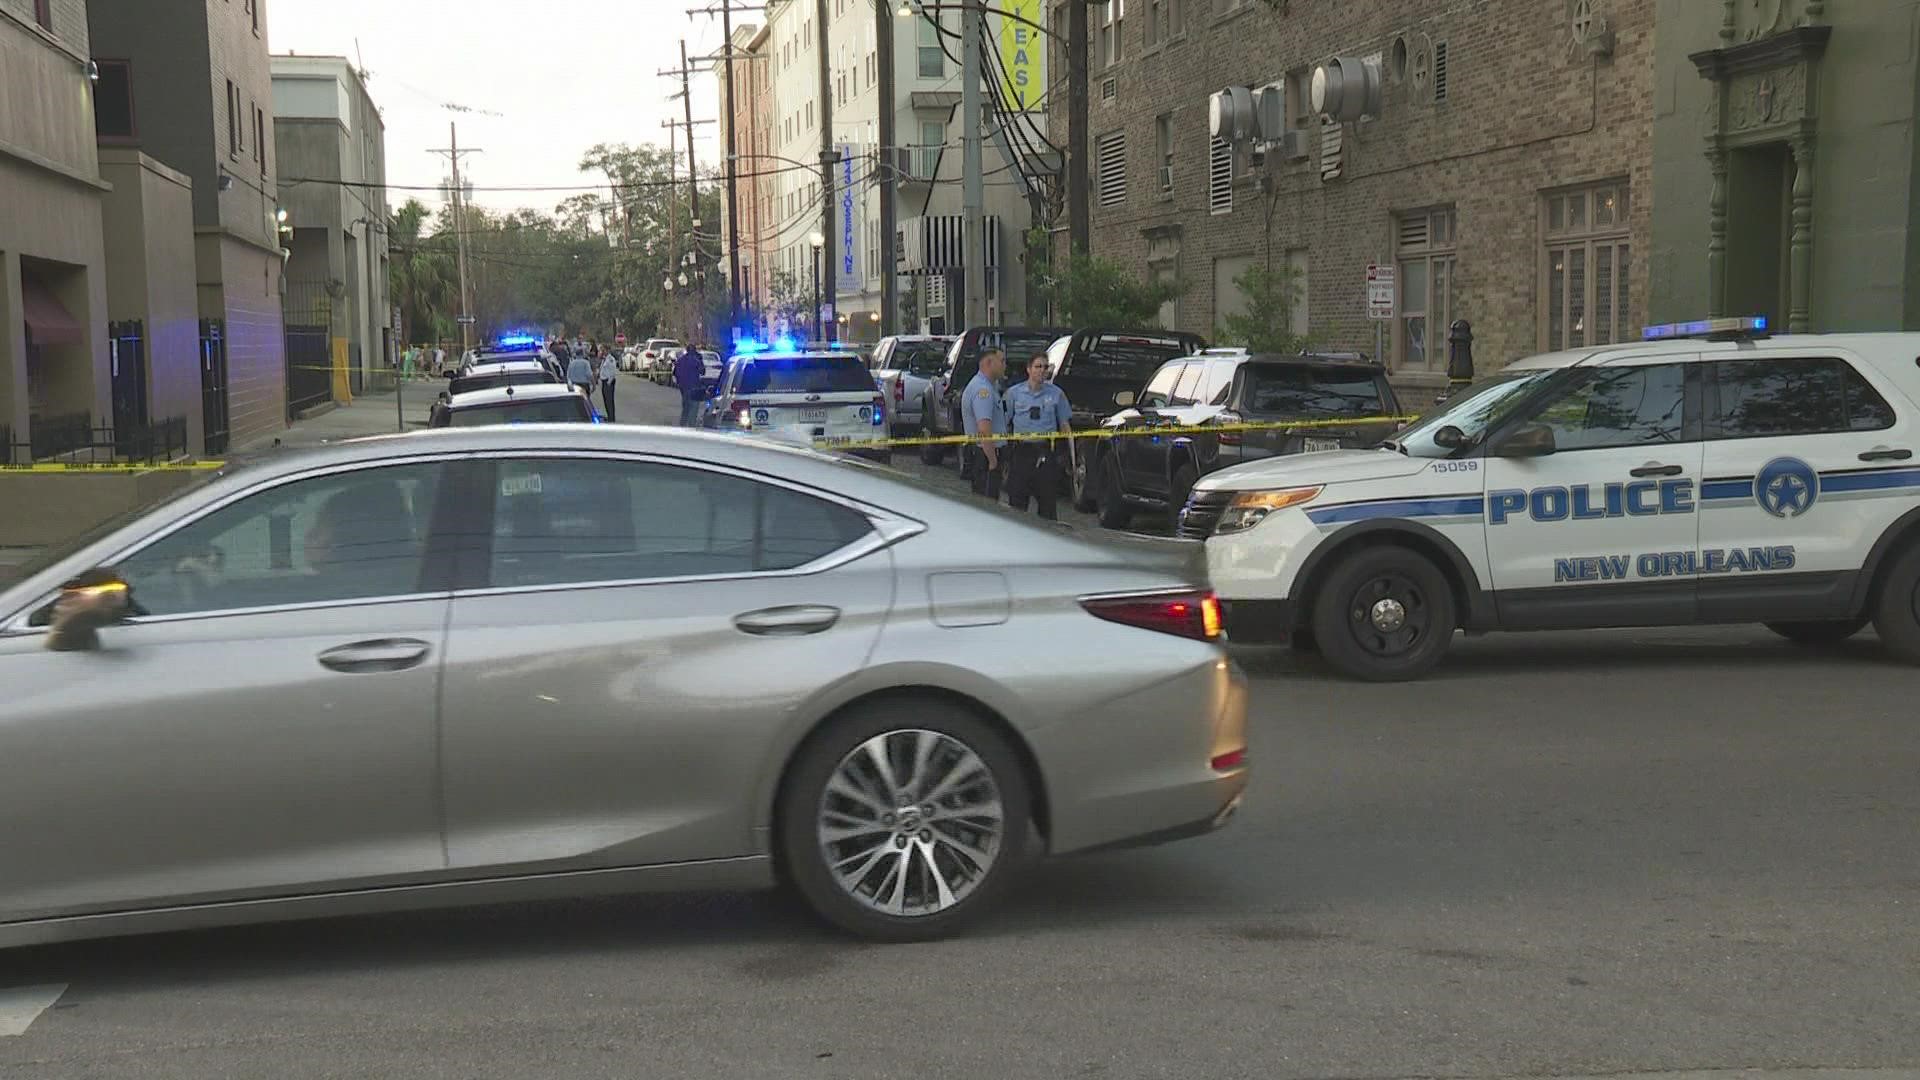 The crime rate has been raised by two after two people were shot and killed Friday afternoon.